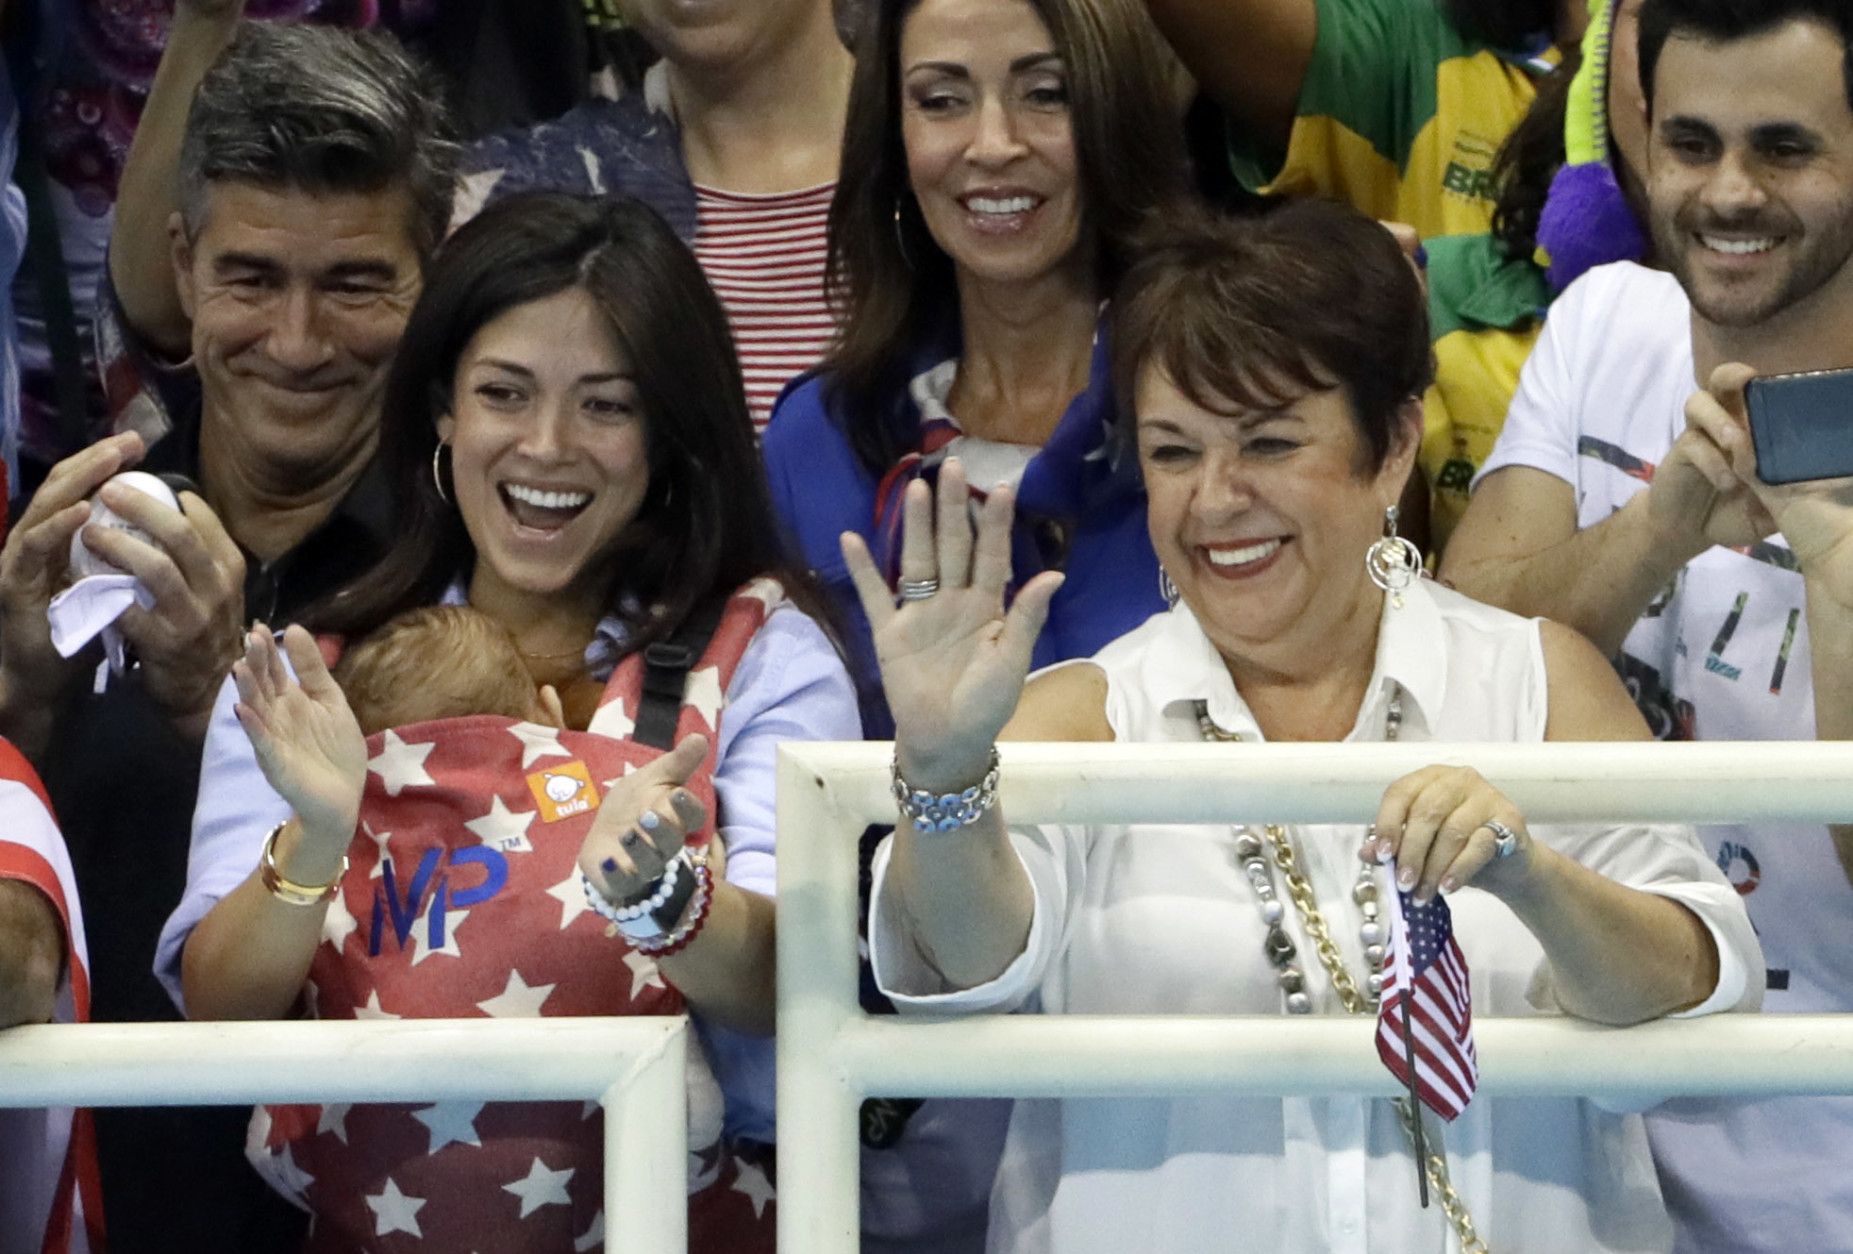 The family of United States' Michael Phelps, mother Debbie, right, and his fiance Nicole Johnson holding their baby Boomer during the swimming competitions at the 2016 Summer Olympics, Monday, Aug. 8, 2016, in Rio de Janeiro, Brazil. (AP Photo/David J. Phillip)